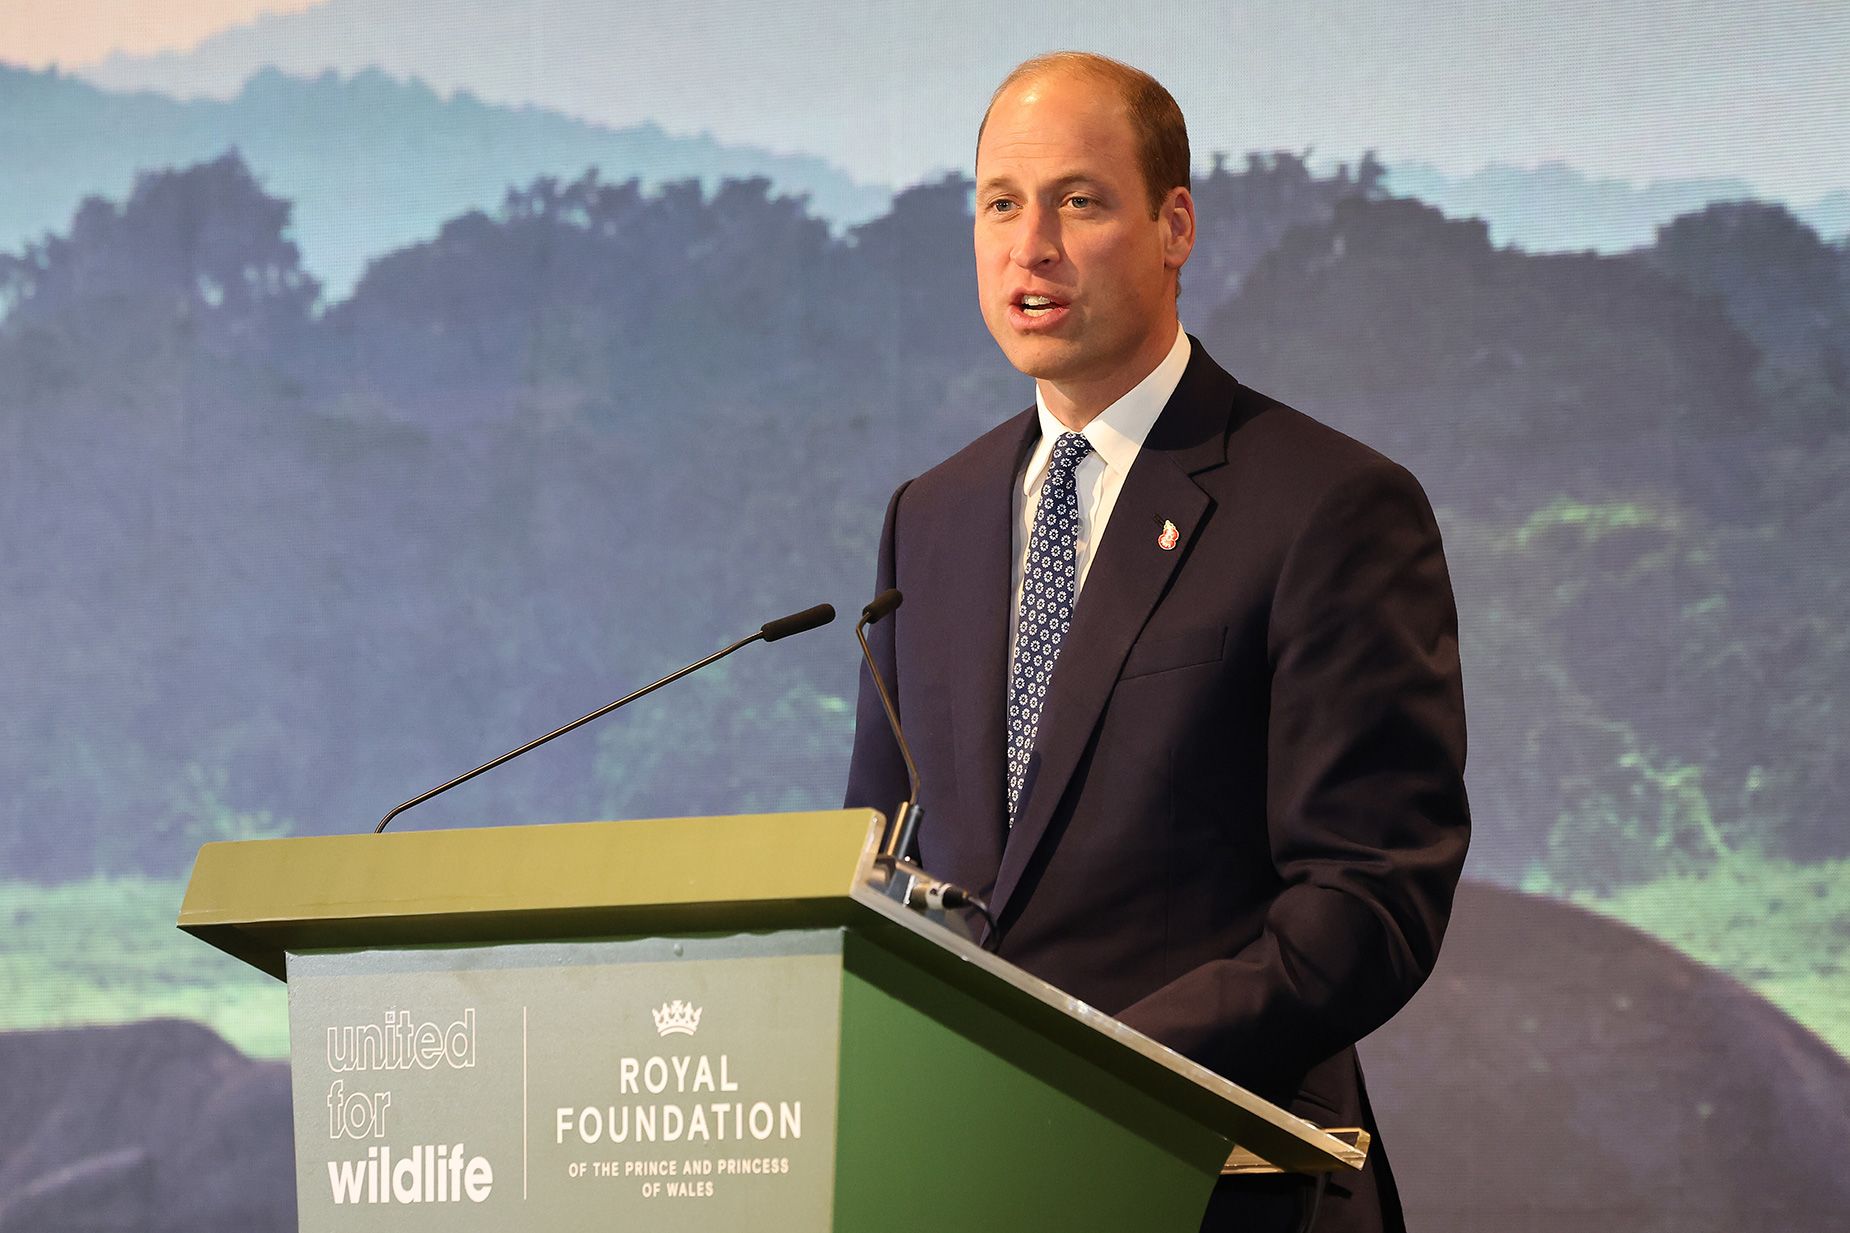 The Prince of Wales speaks at the United for Wildlife Global summit at Gardens by the Bay on day two of his visit to Singapore.